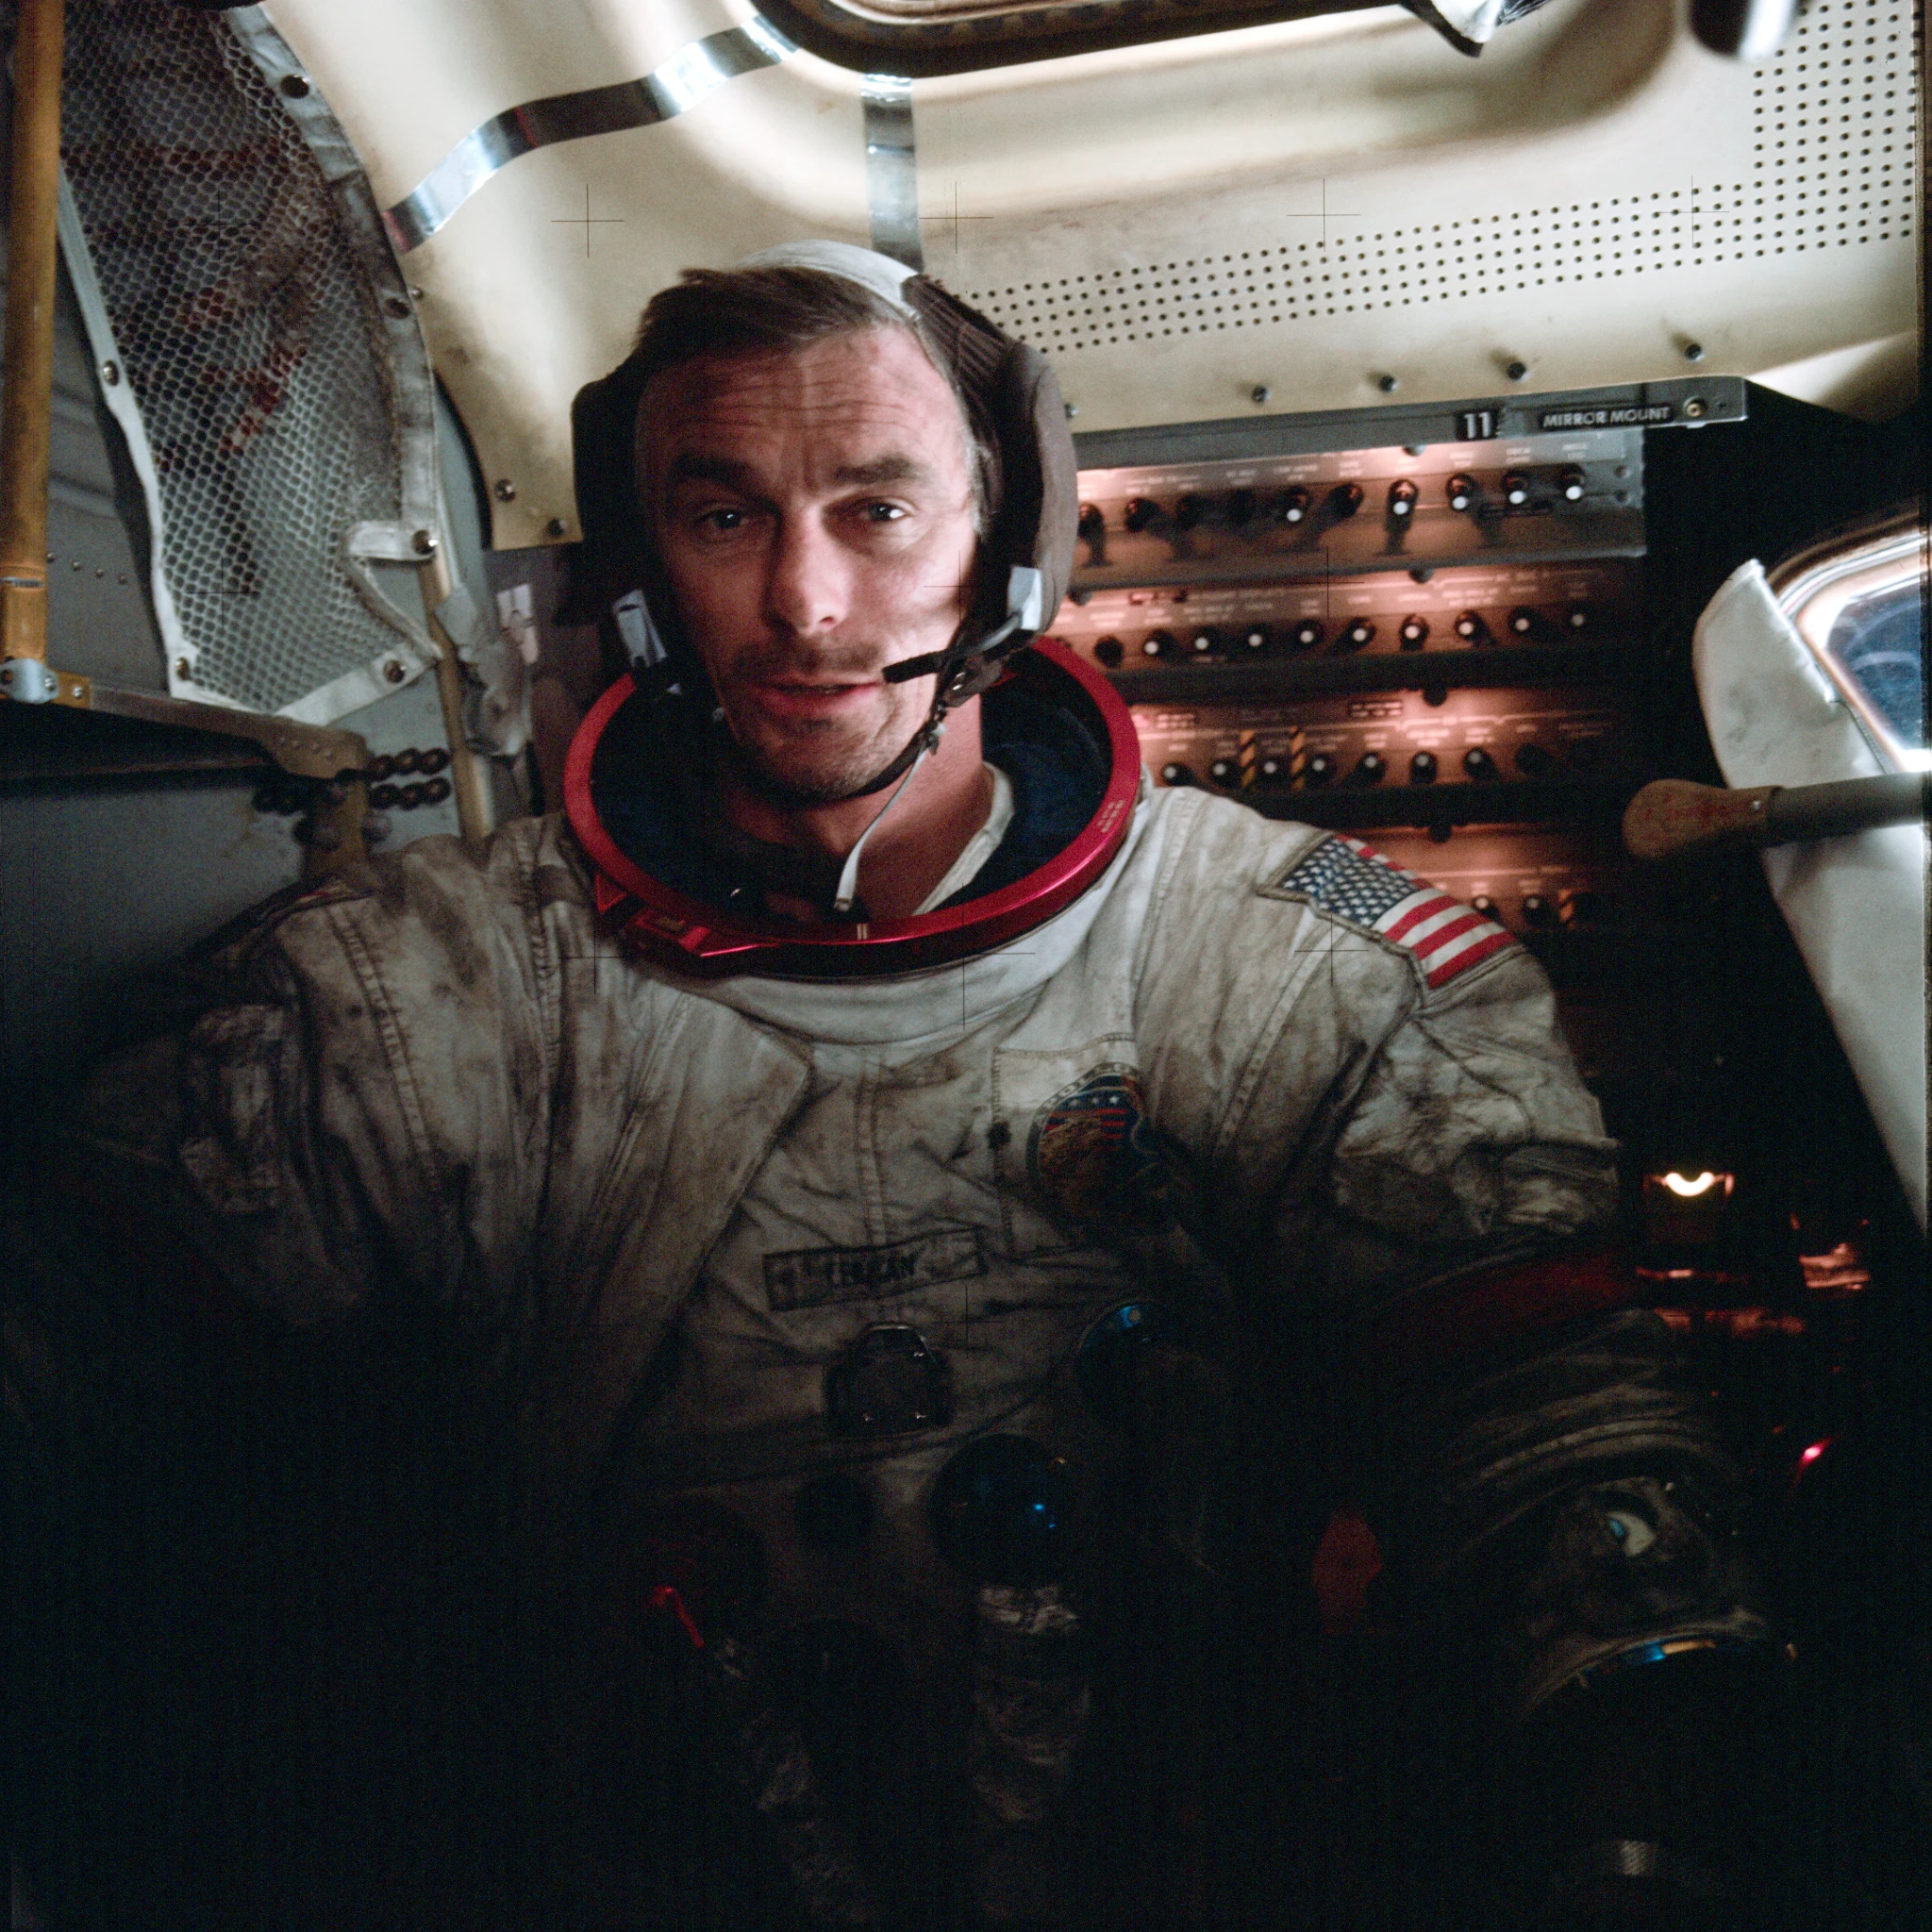 Astronaut Gene Cernan sits in his spacesuit, helmet off, inside the Apollo 17 module. Various knobs, tubes, and buttons can be seen behind him. His suit is completely covered in black lunar dust. https://en.wikipedia.org/wiki/Lunar_soil#cite_note-16